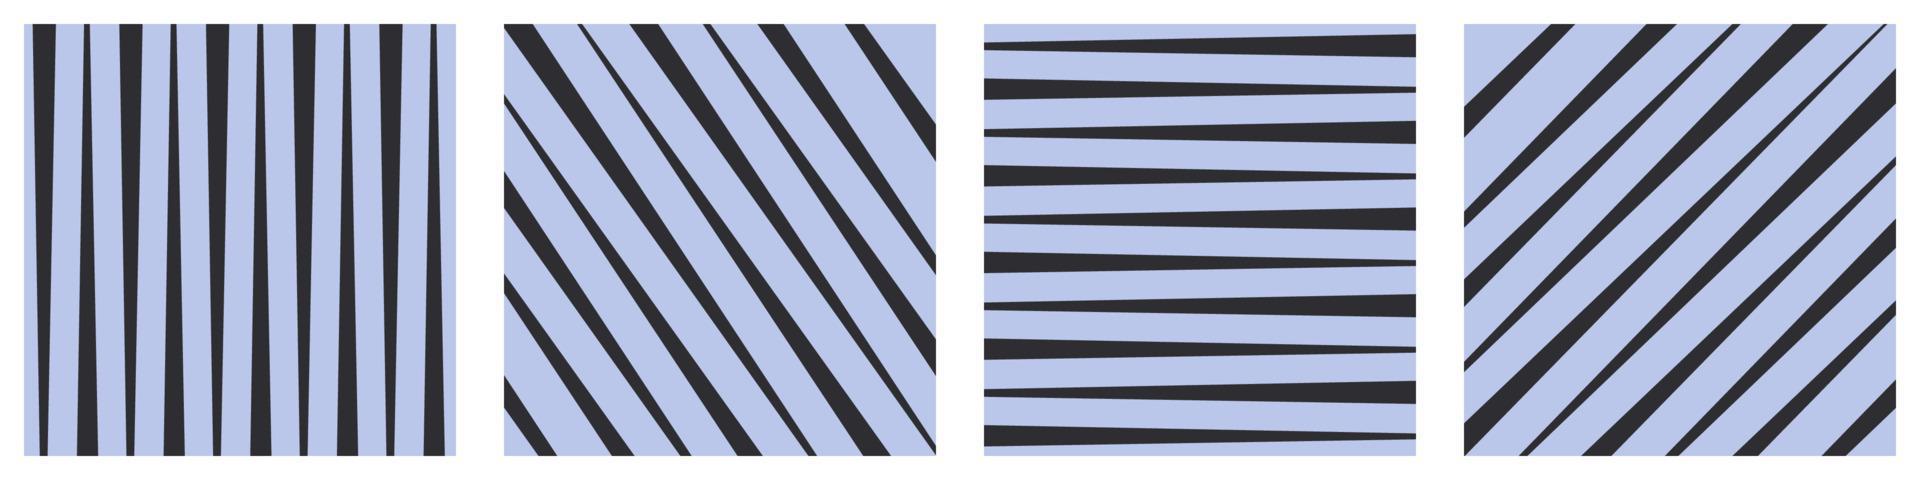 Set of simple square patterns from unstable width strips. Horizontal vertical and diagonal lines background. Minimalistic templates. Vector illustration.